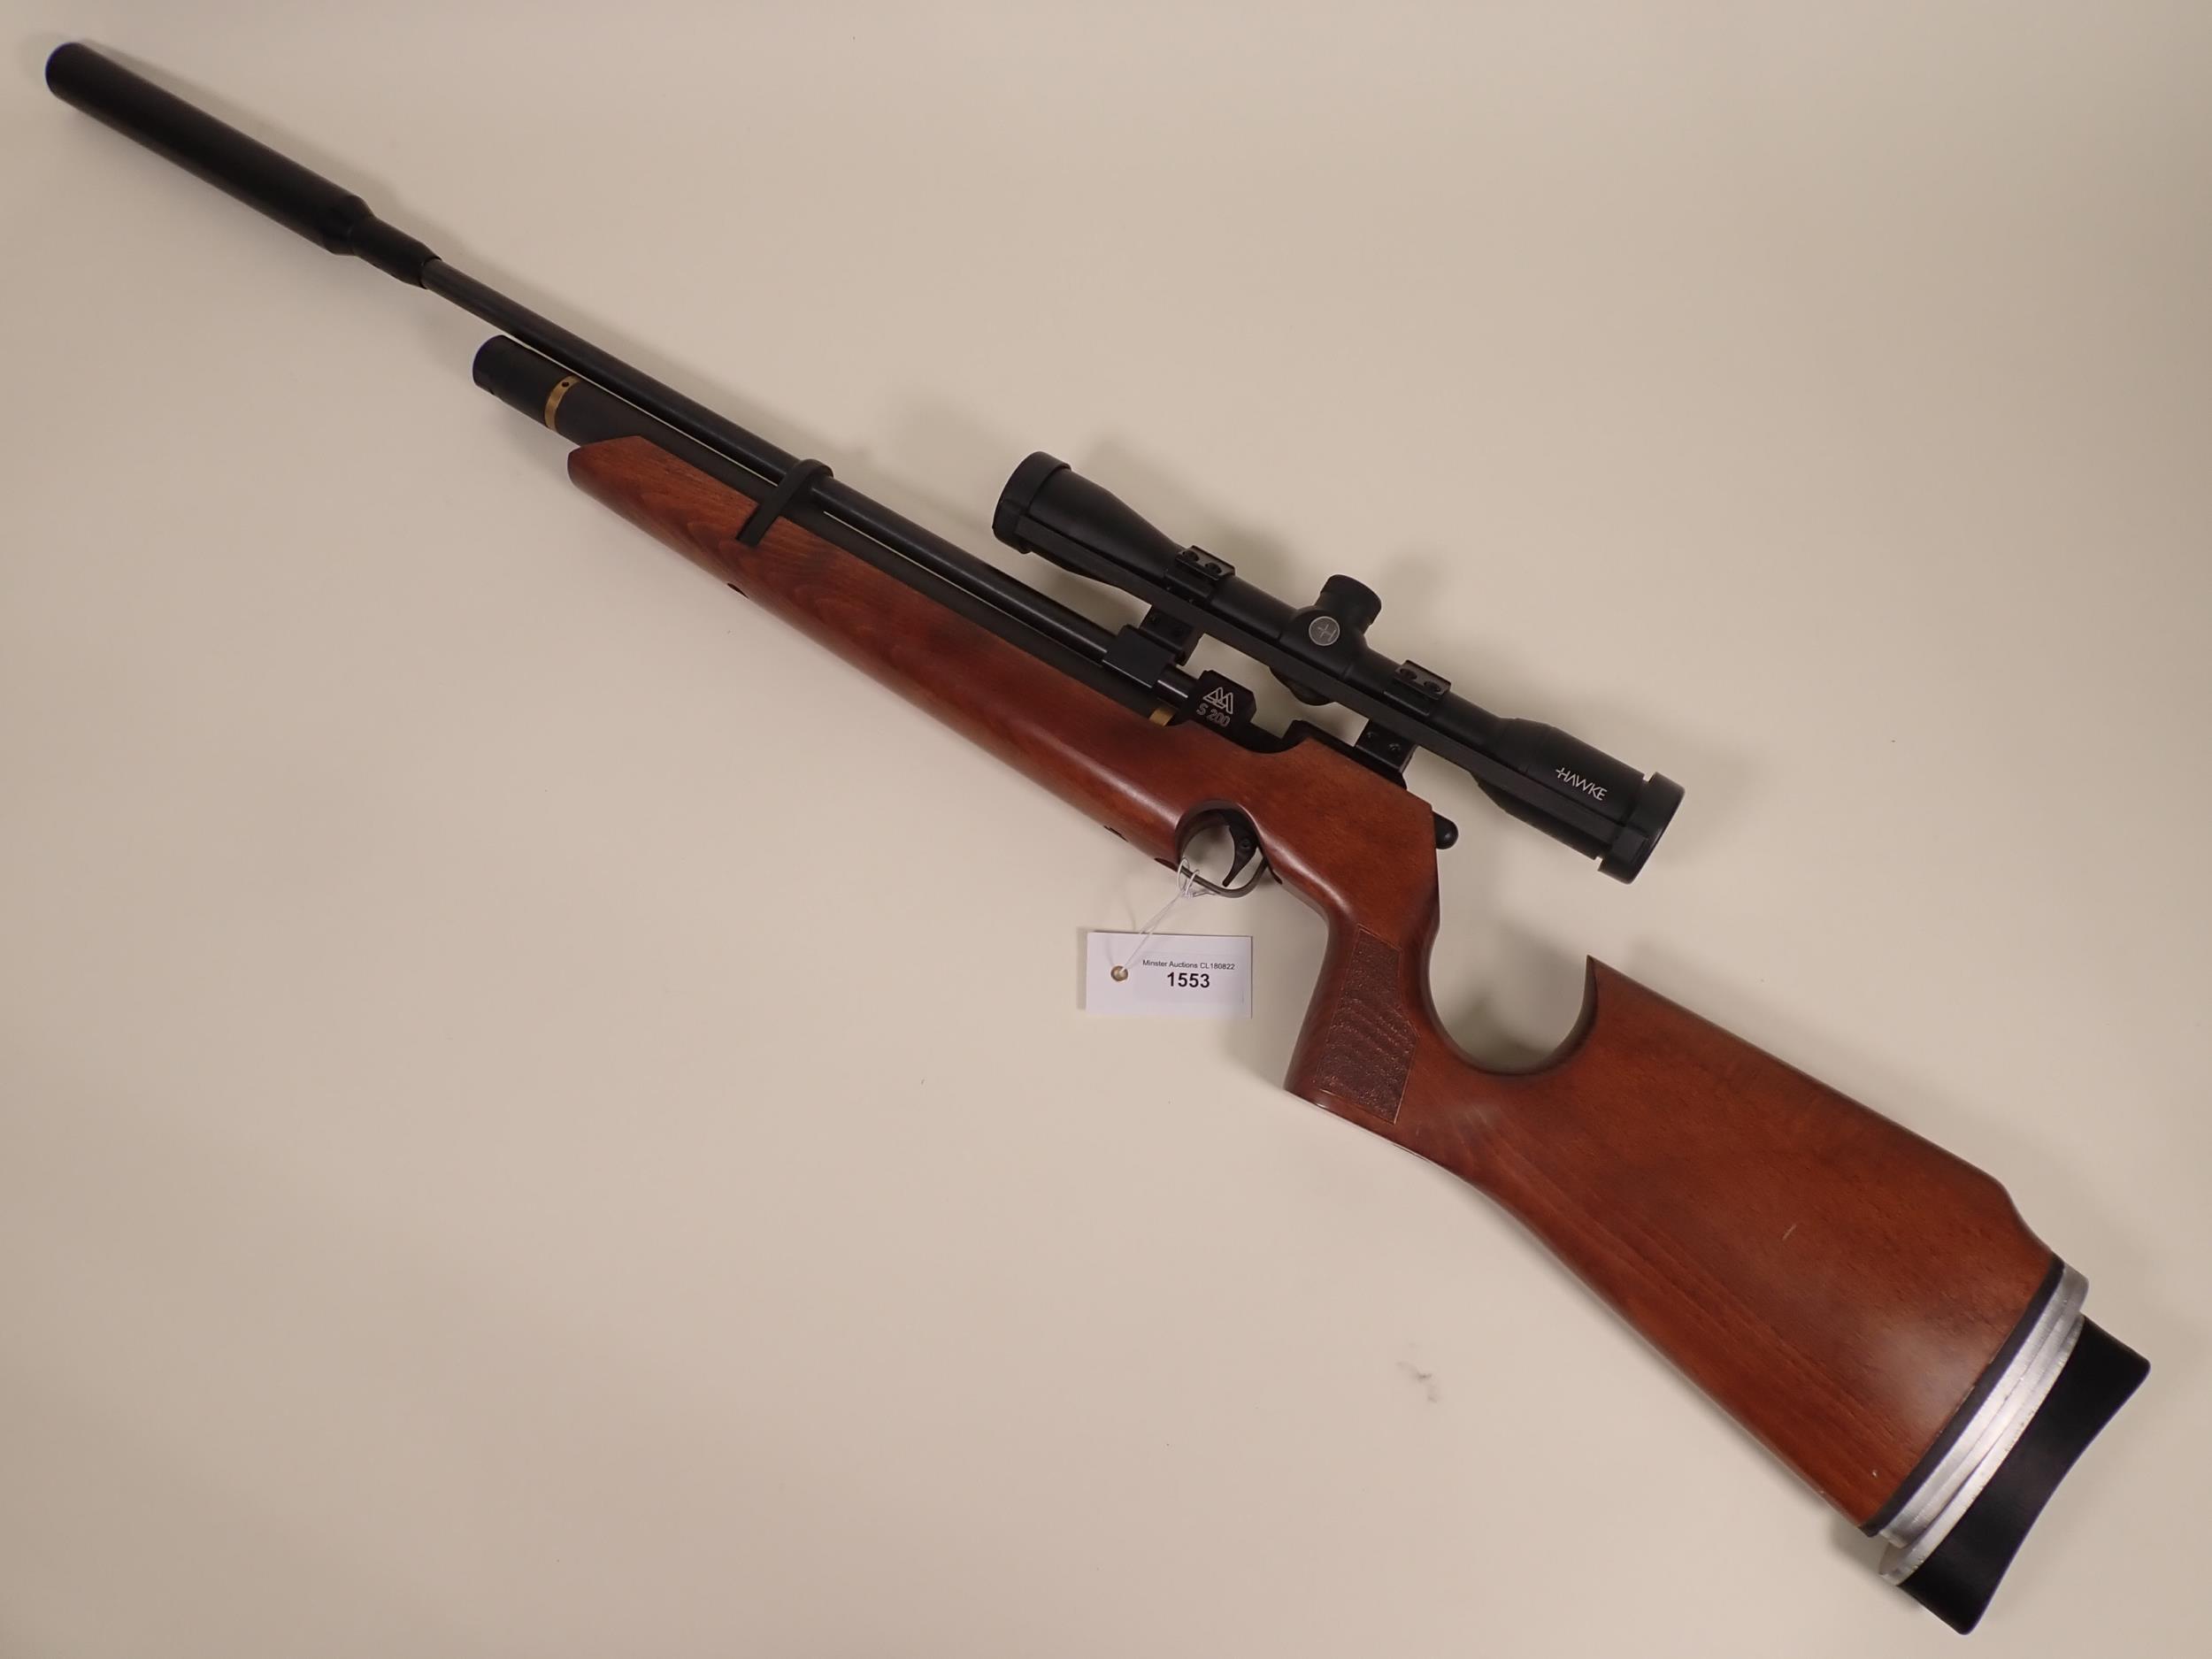 An Air Arms S200 .22 PCP Air Rifle with sound moderator and Hawke 4x32 telescopic sight